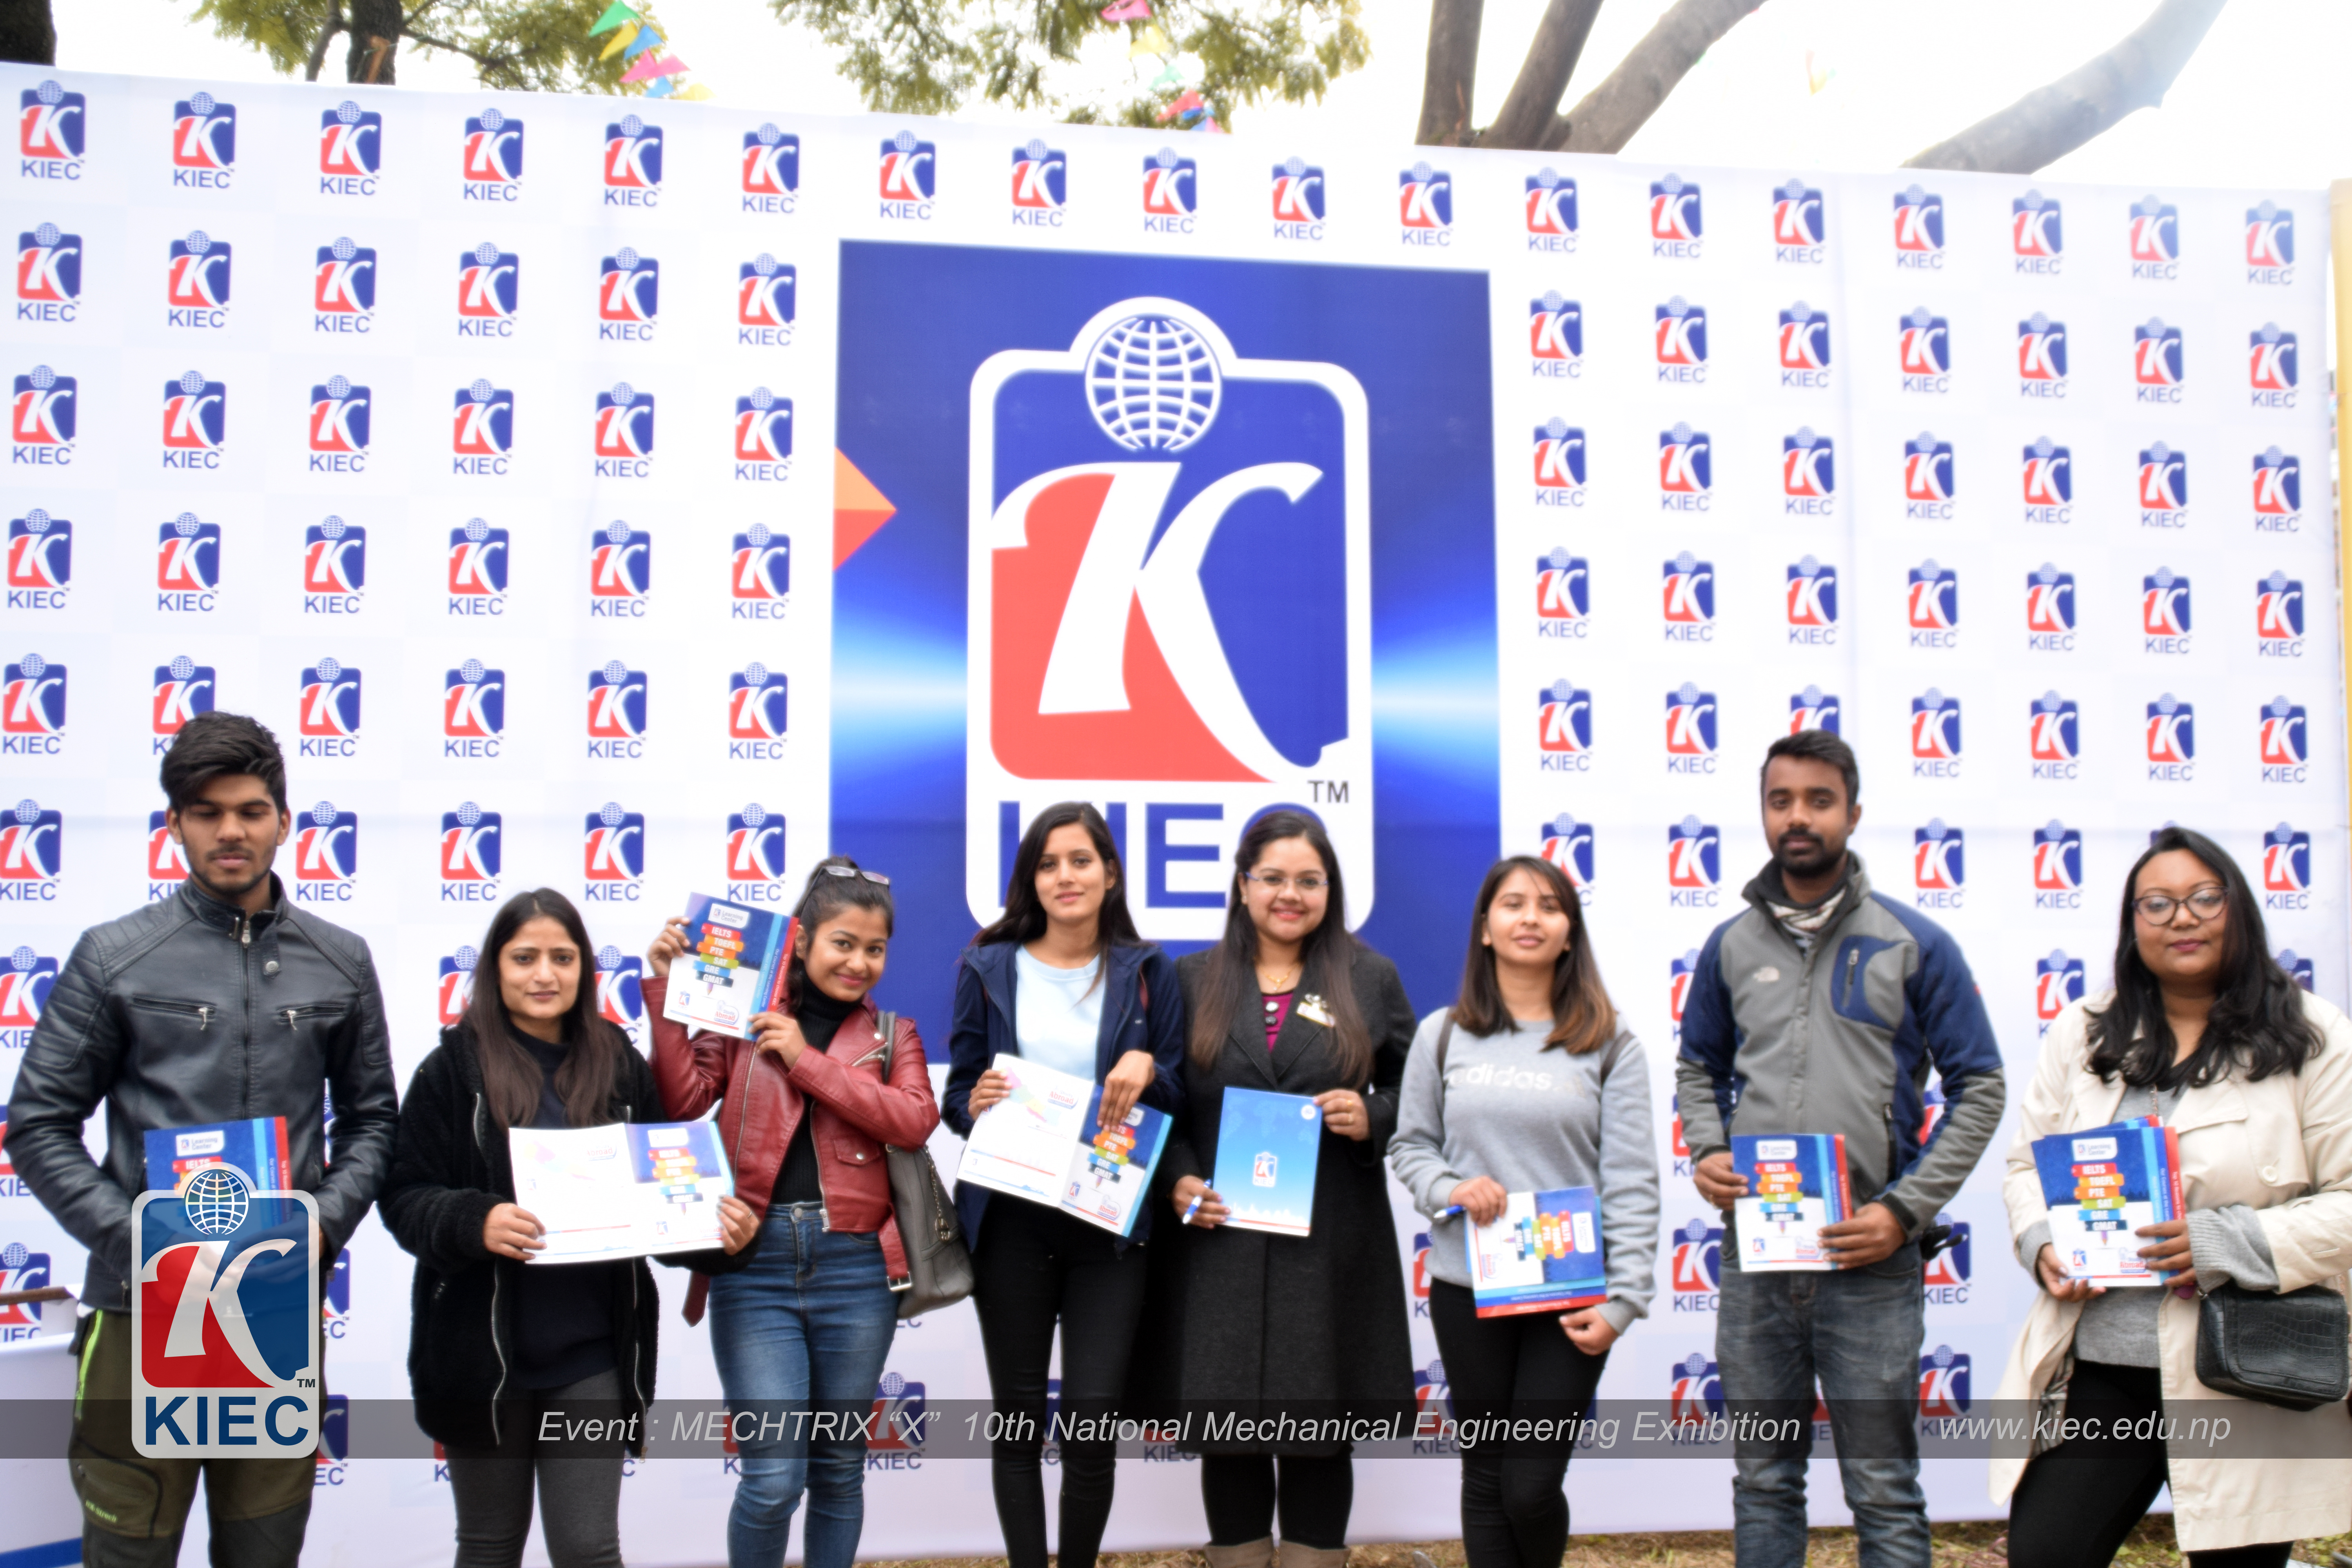 Students with KIEC MD and Chair Person Namita Shrestha